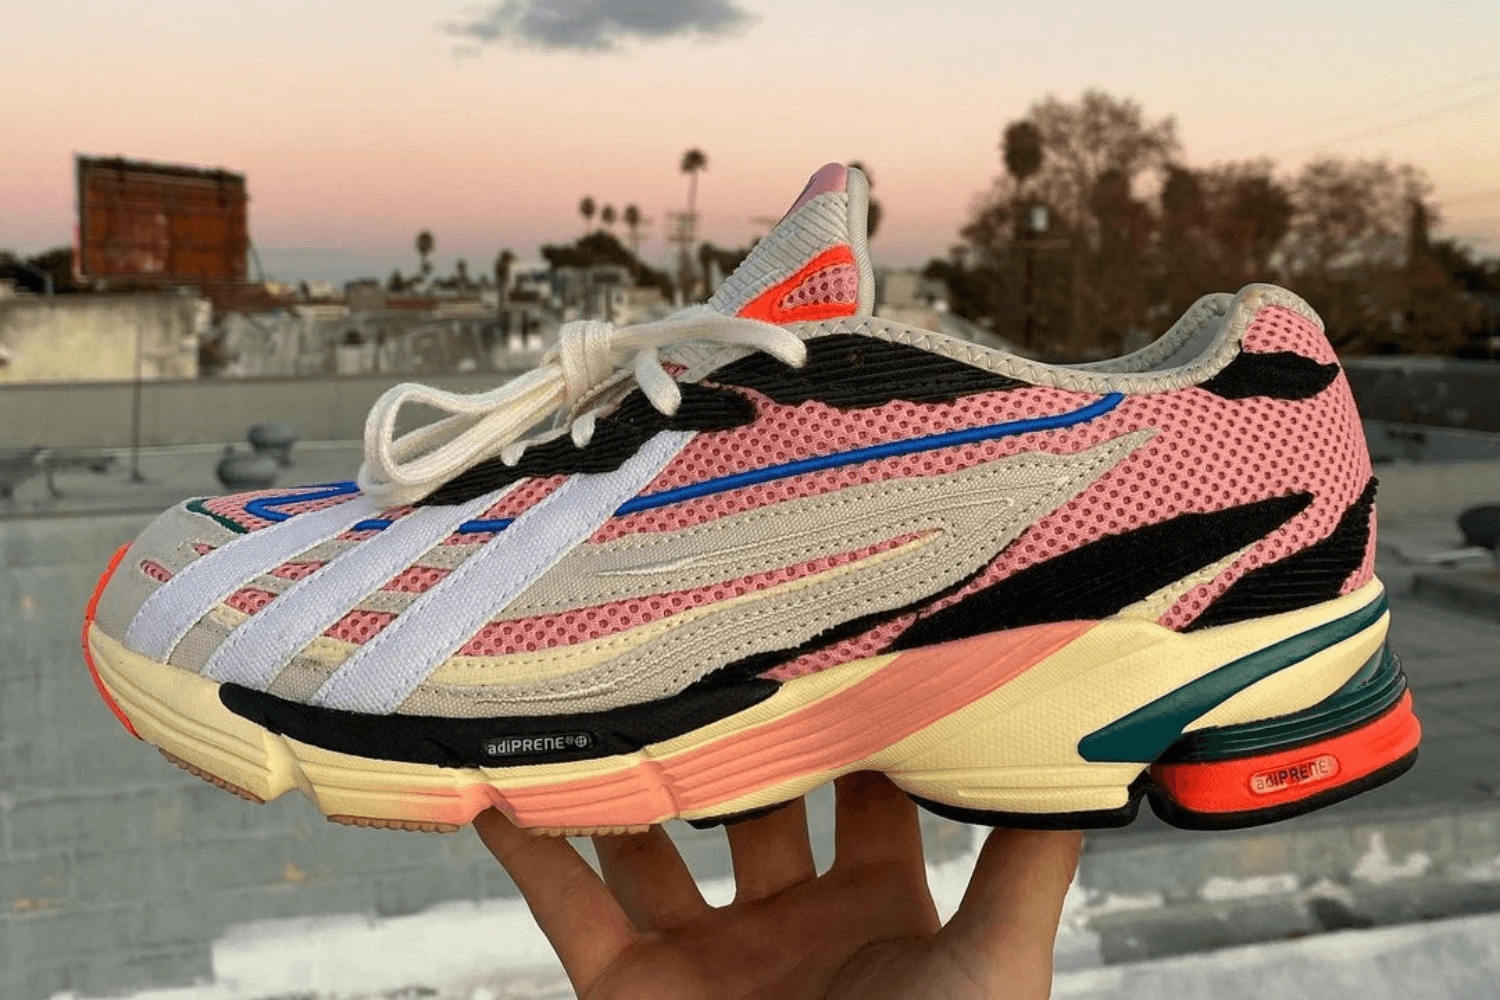 First images of the Sean Wotherspoon x adidas Orketro